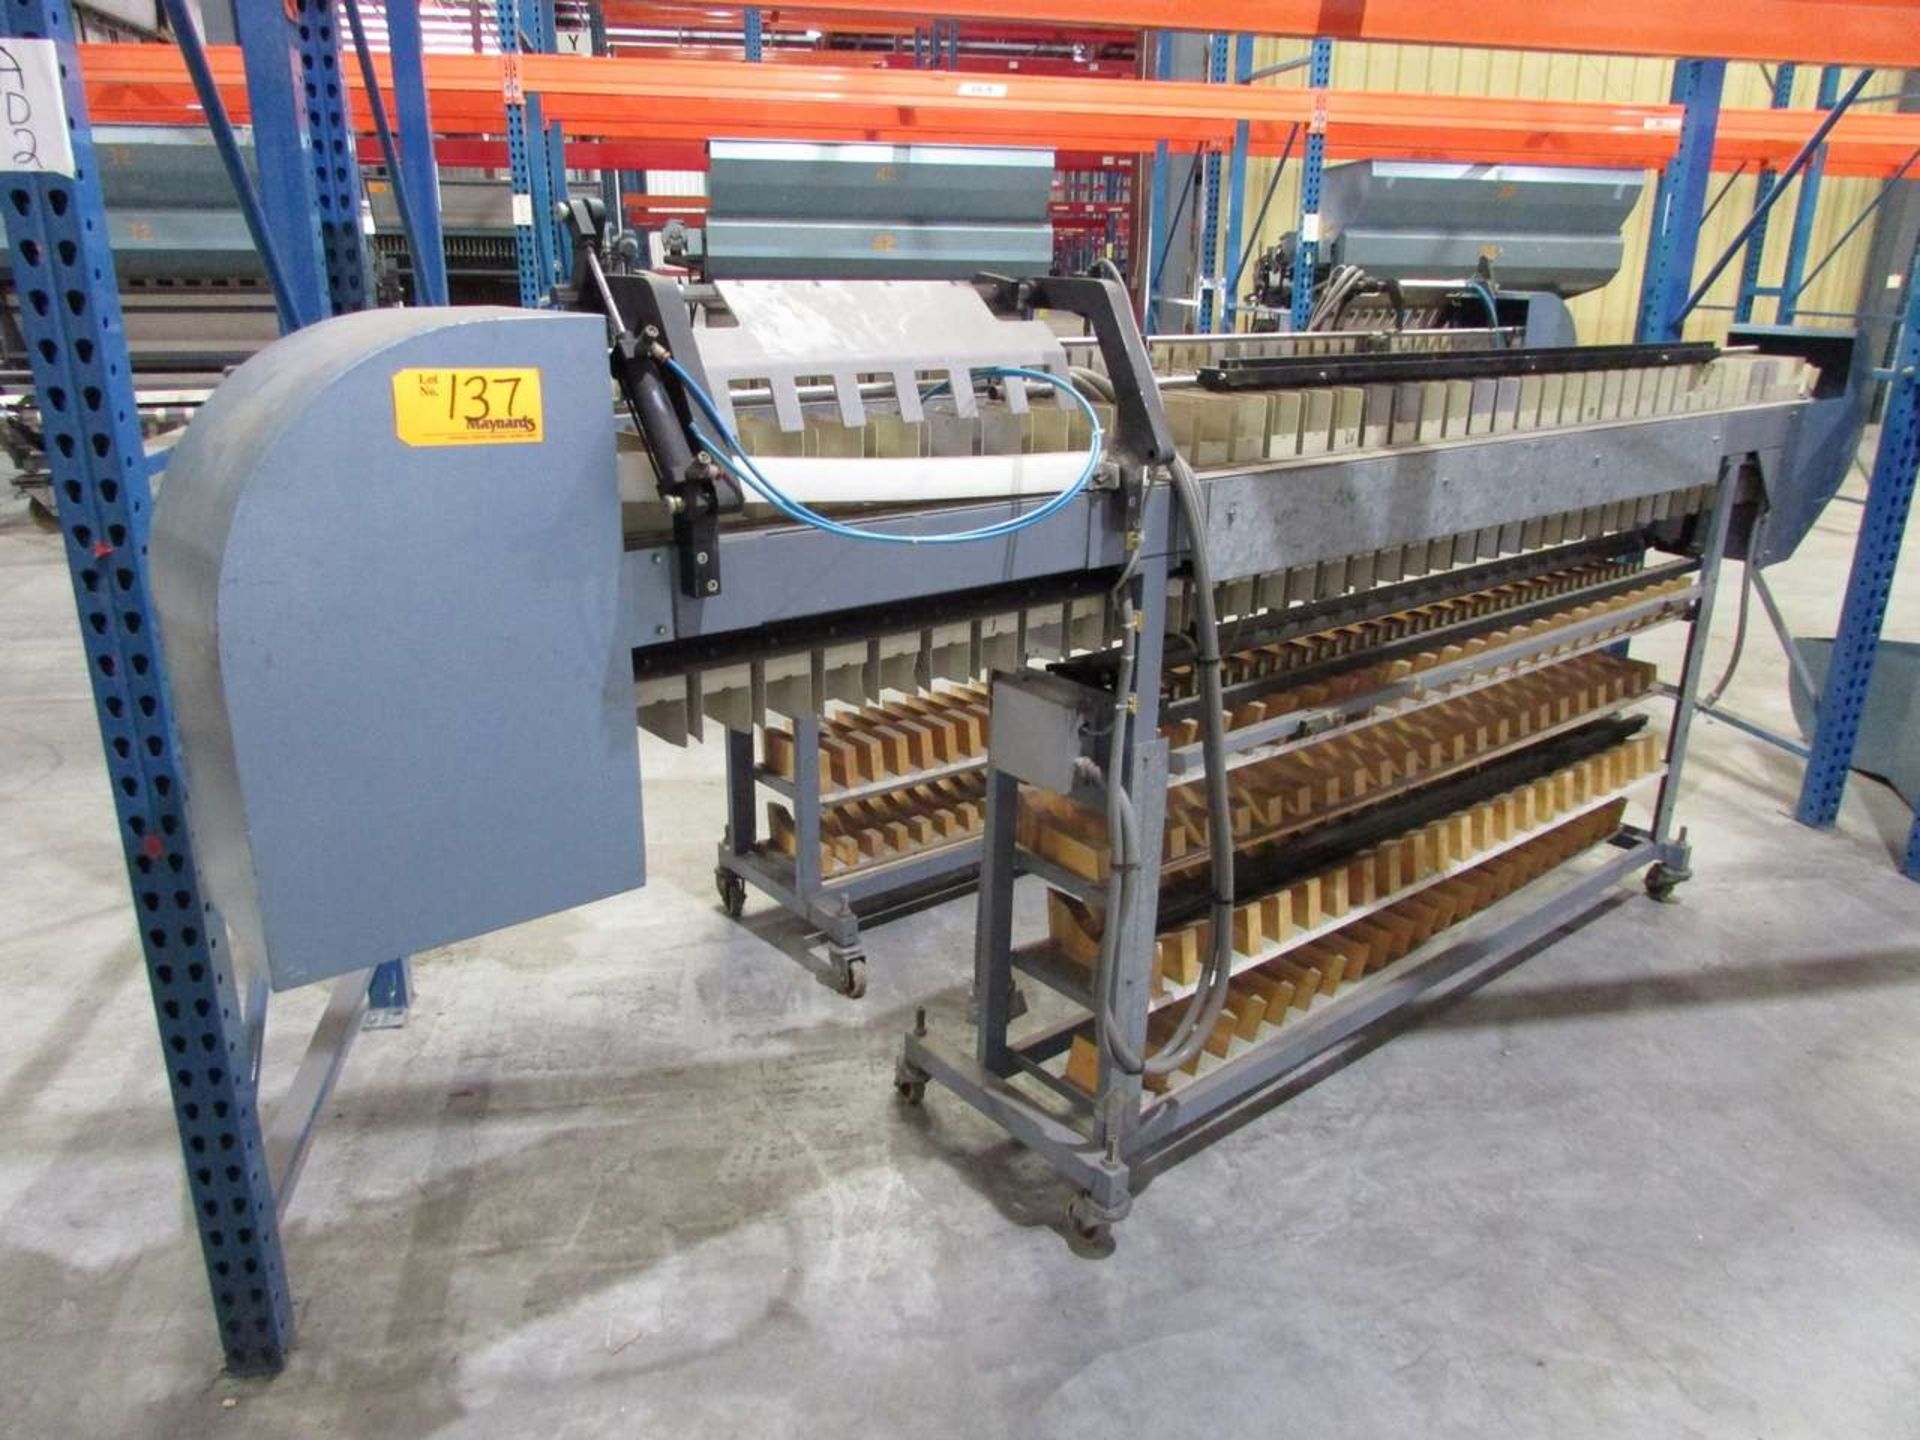 Accordion Style Roll Conveyors